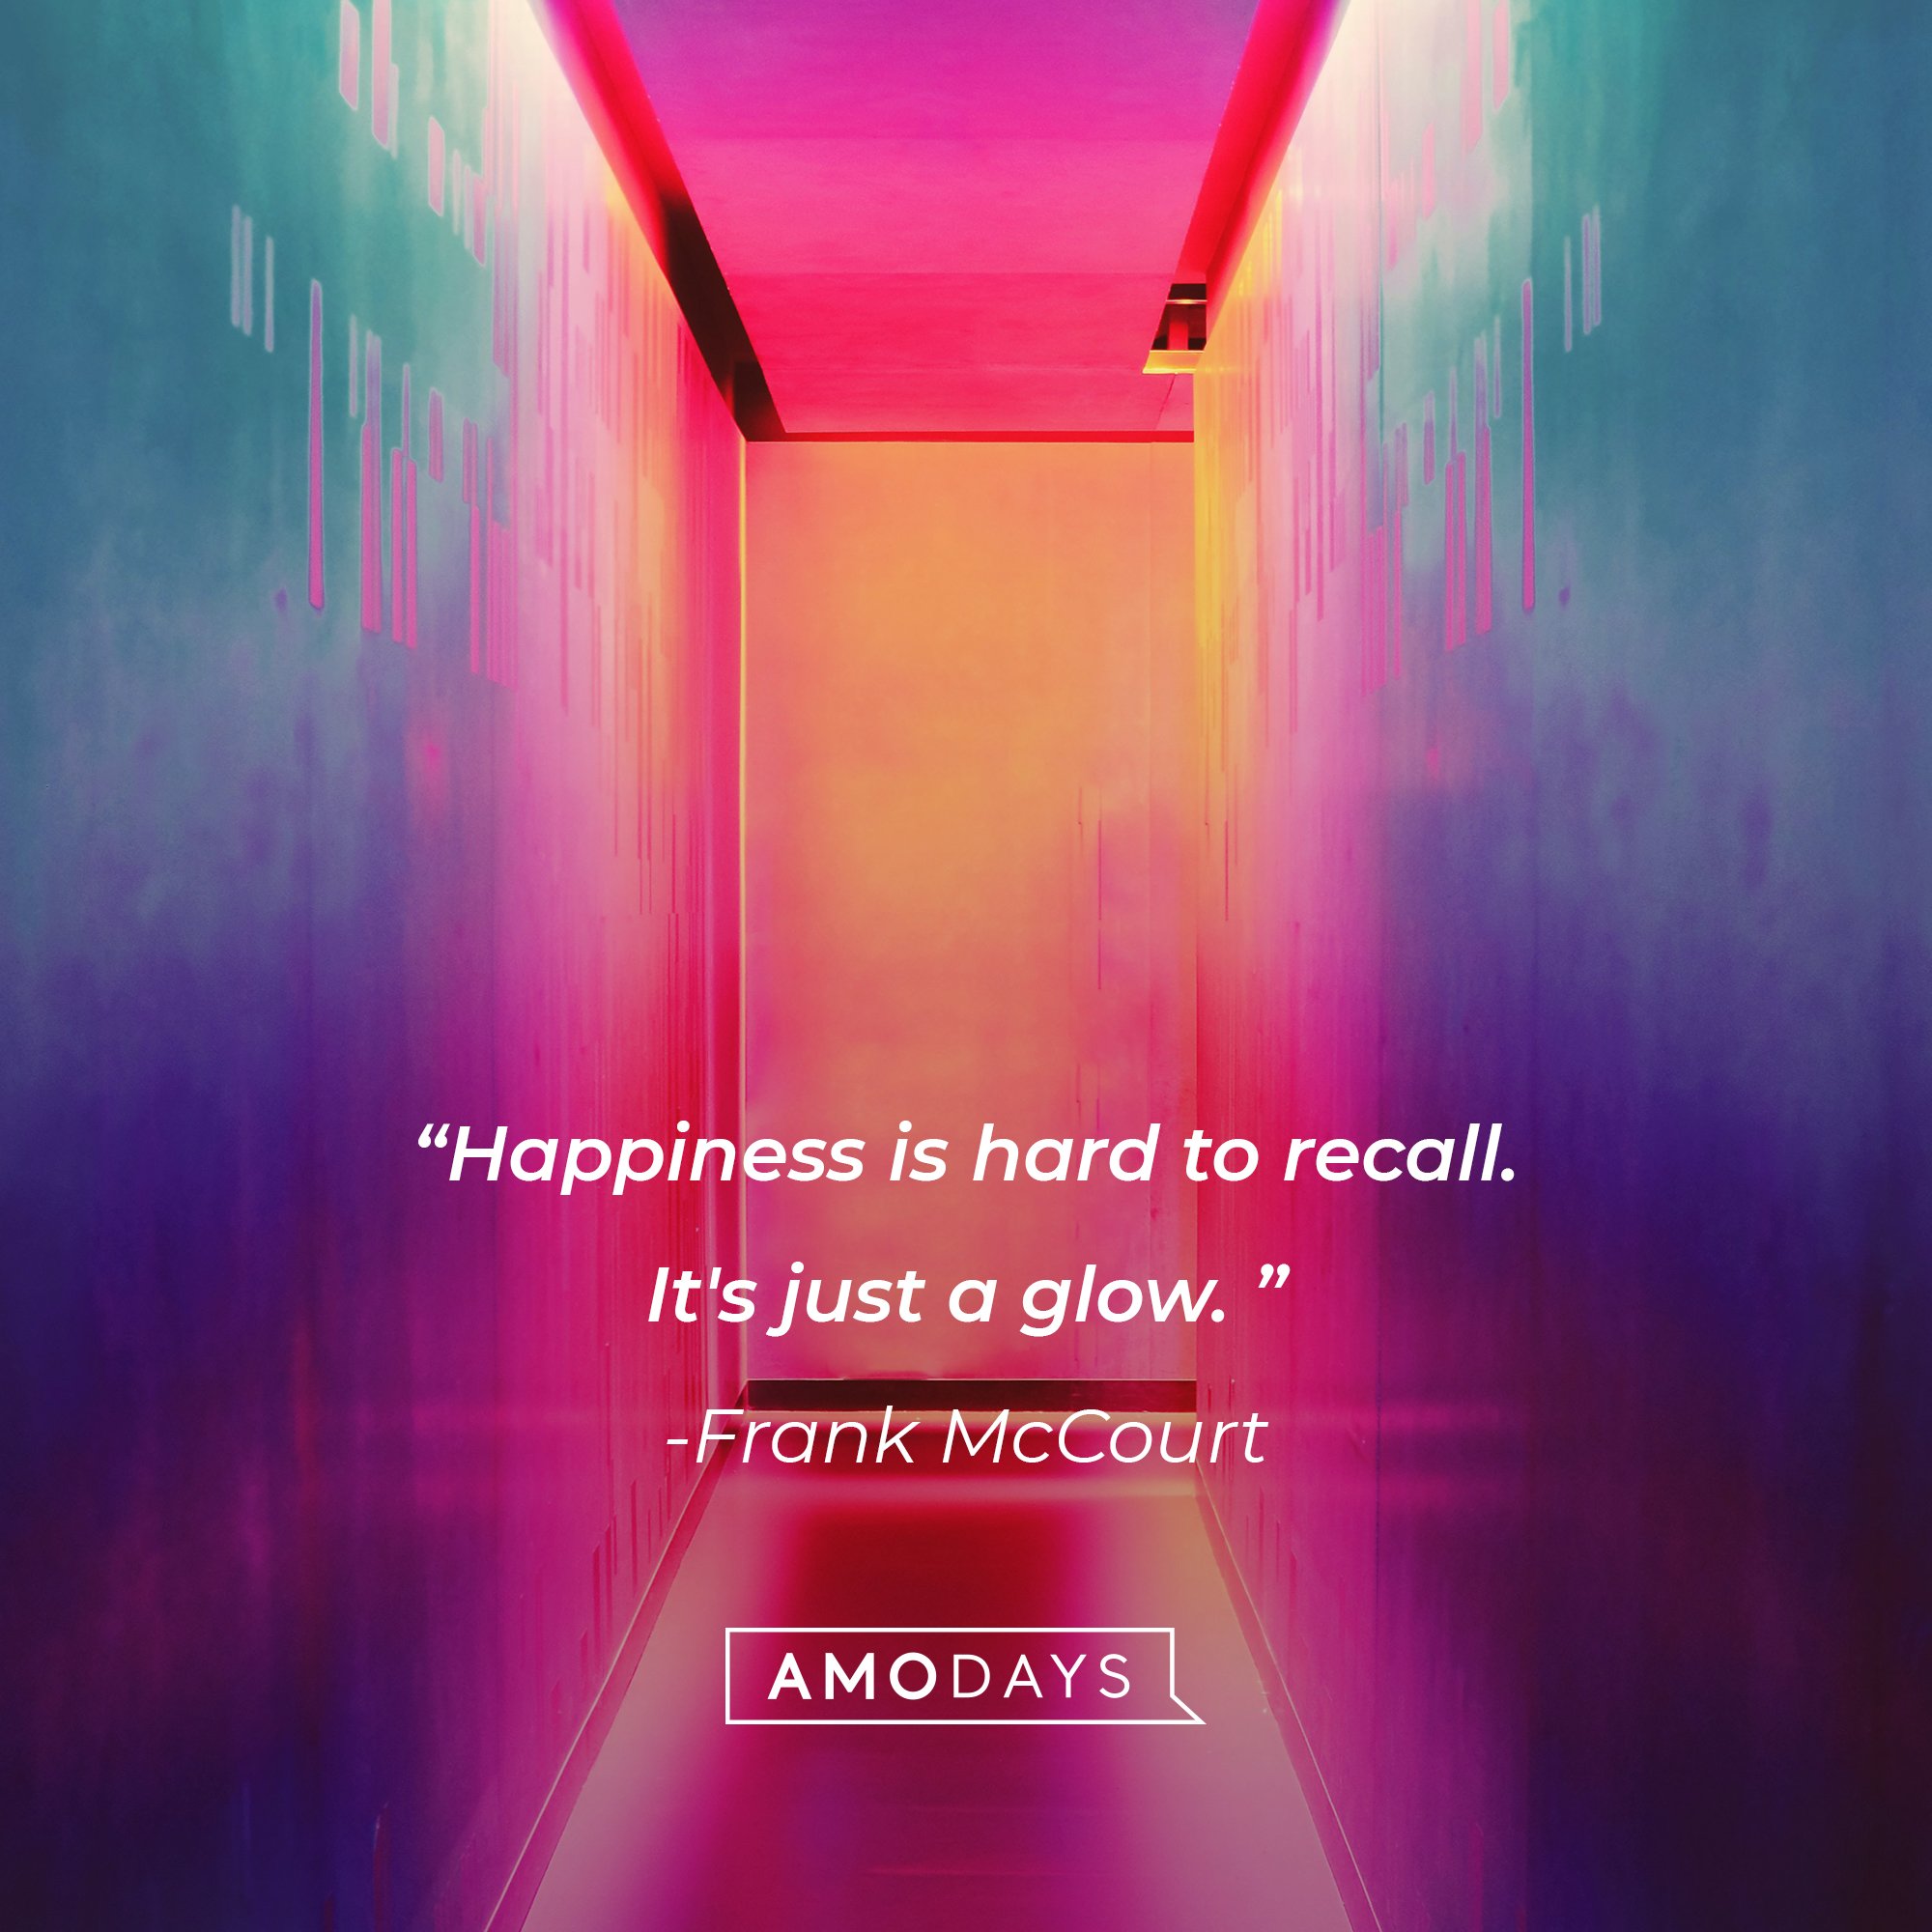 Frank McCourt's quote: "Happiness is hard to recall. It's just a glow. " | Image: AmoDays